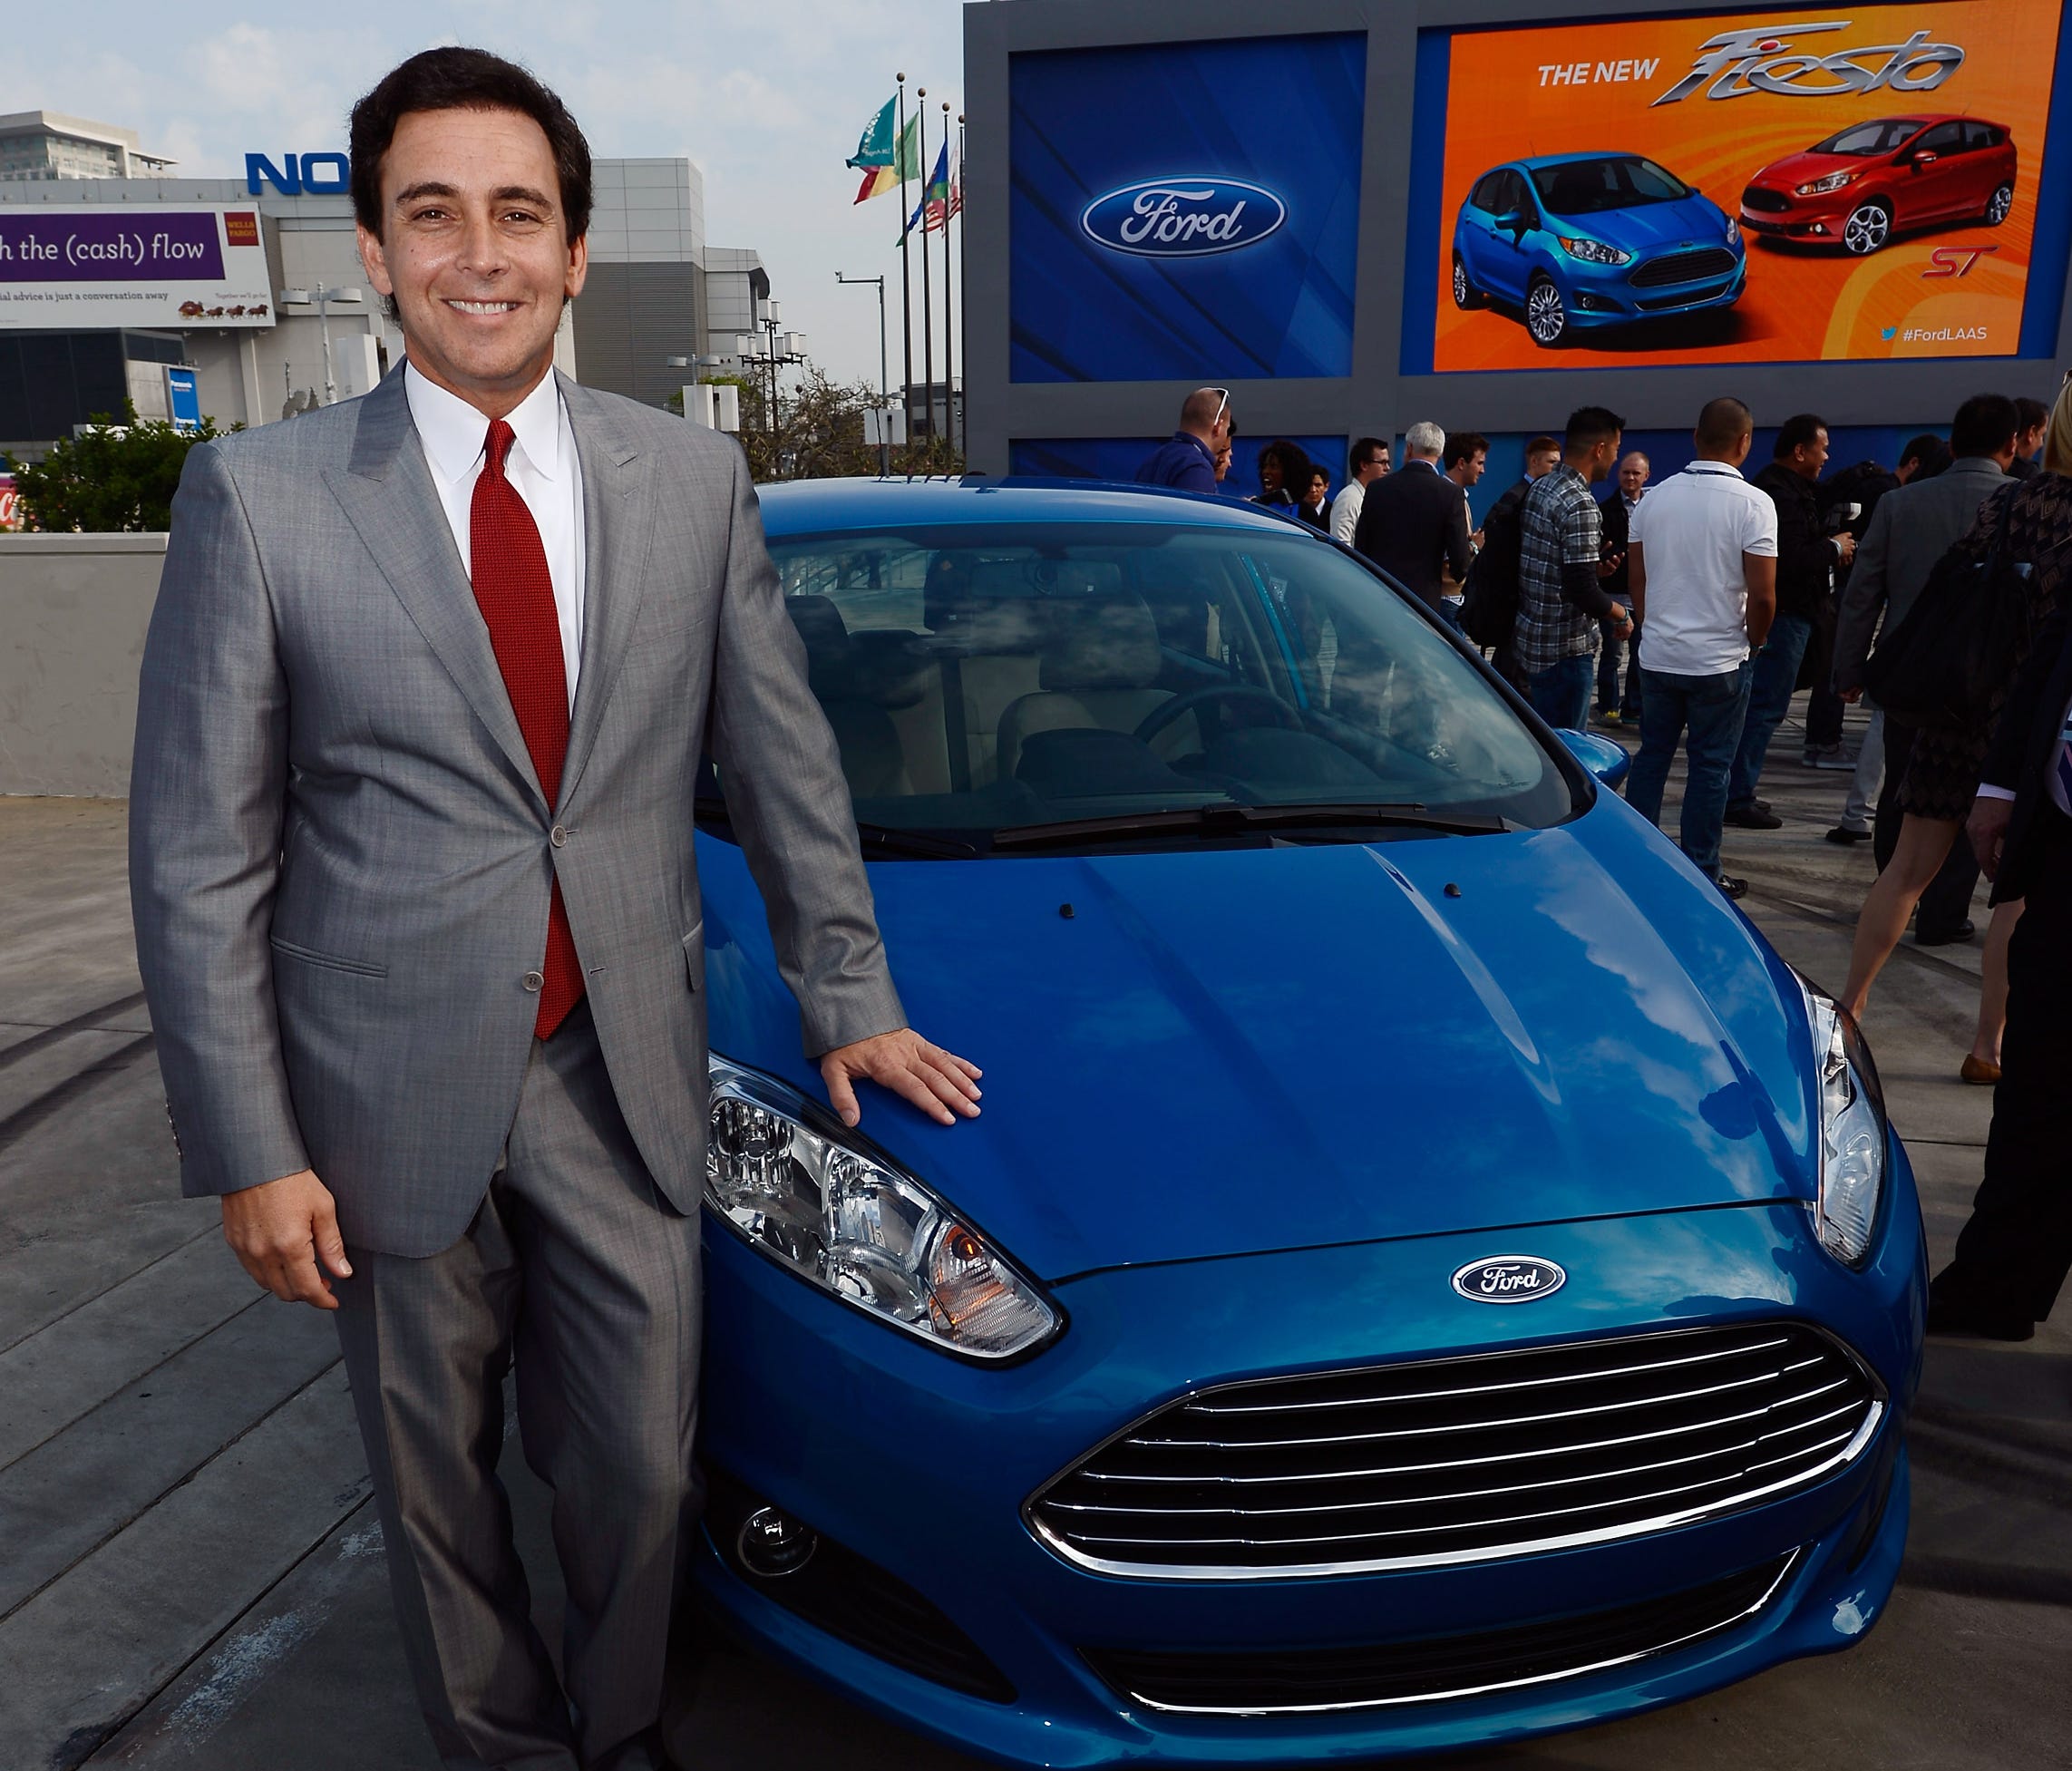 Ford CEO Mark Fields in a 2012 file photo